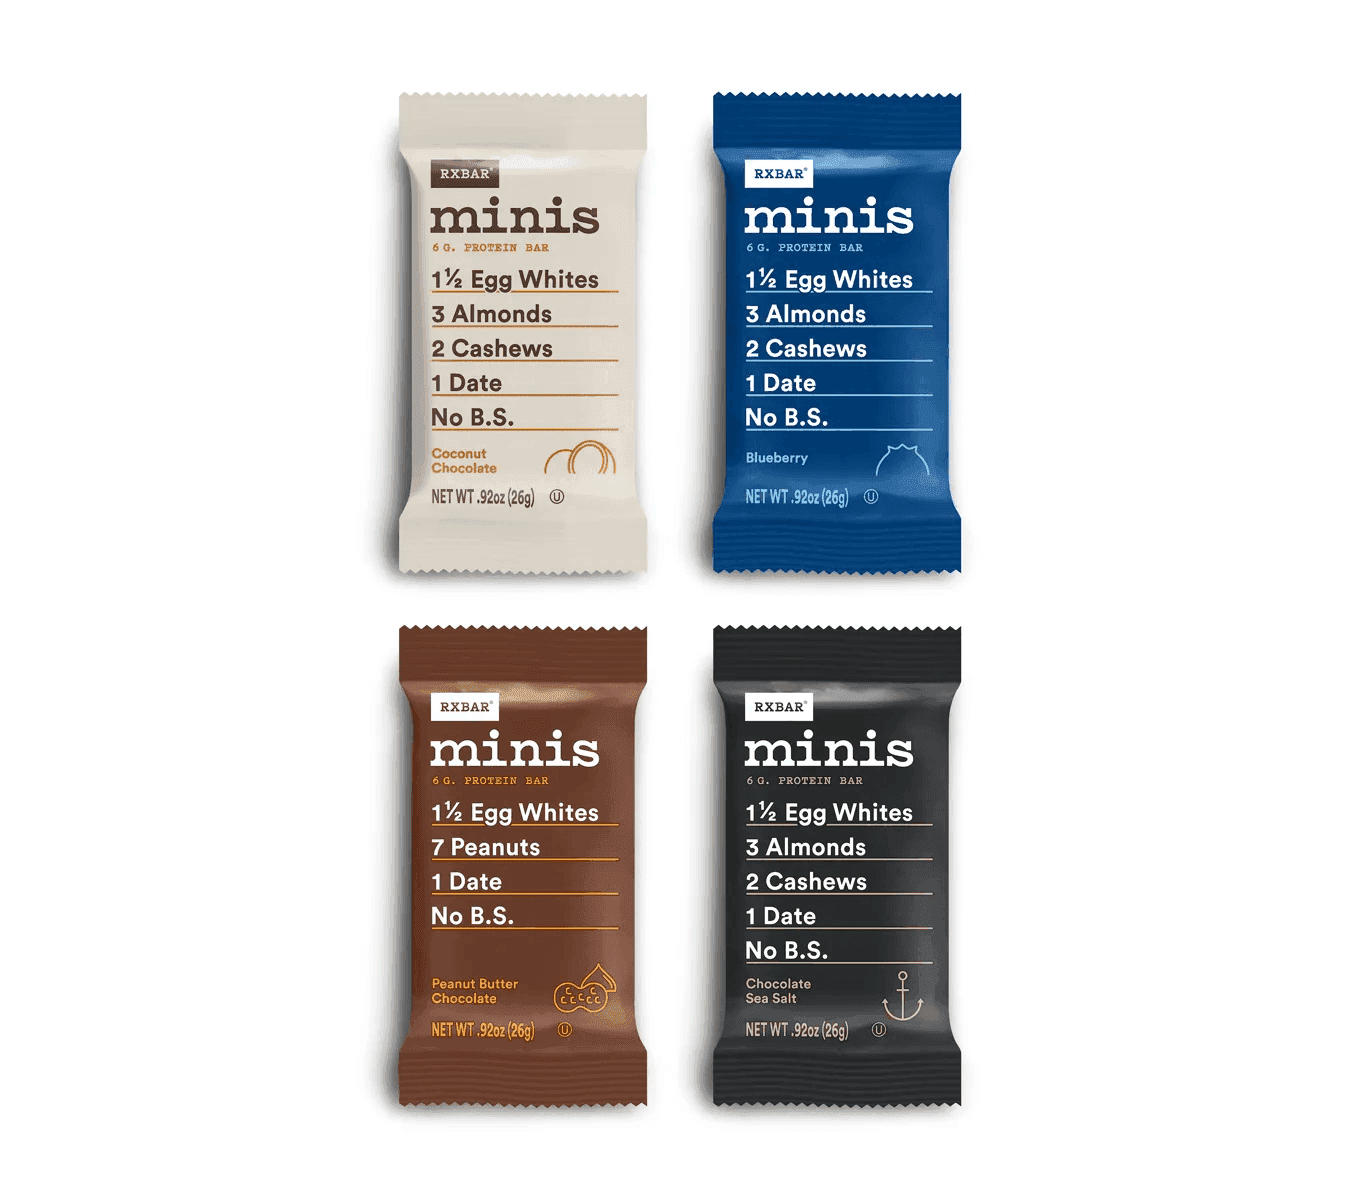 RXBAR - product packaging